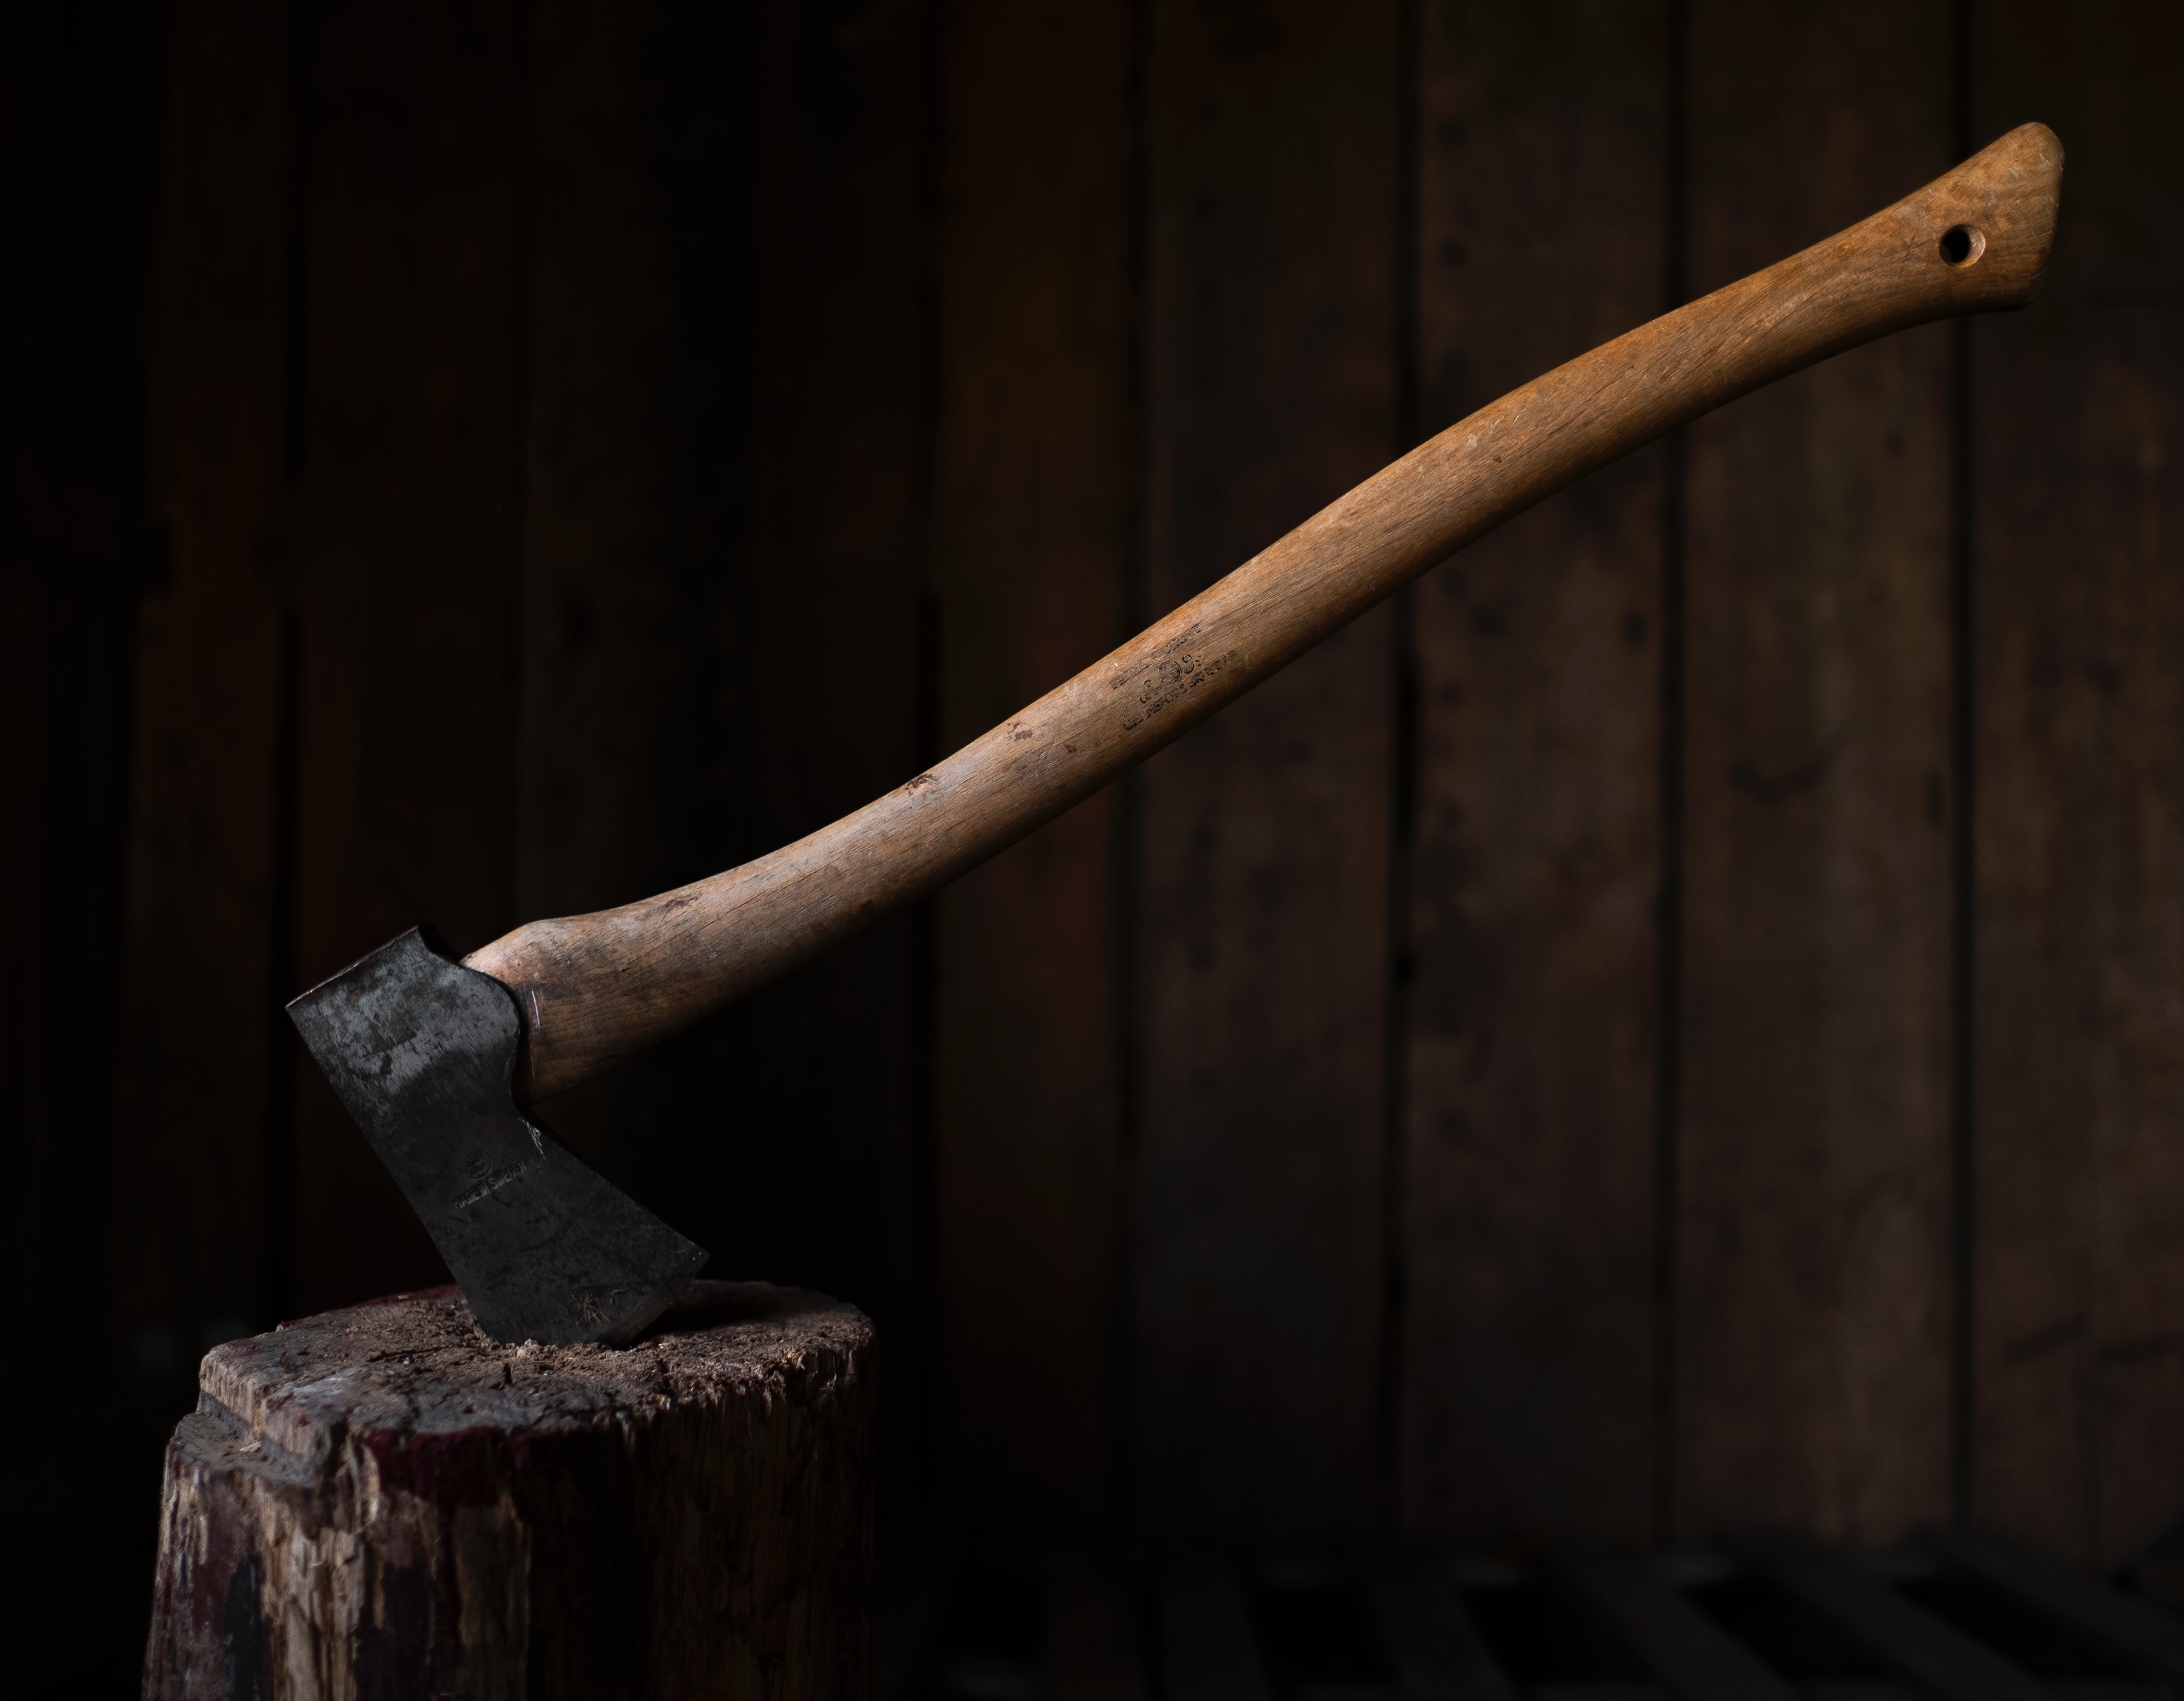 Brown and black axe | Source: Pexels